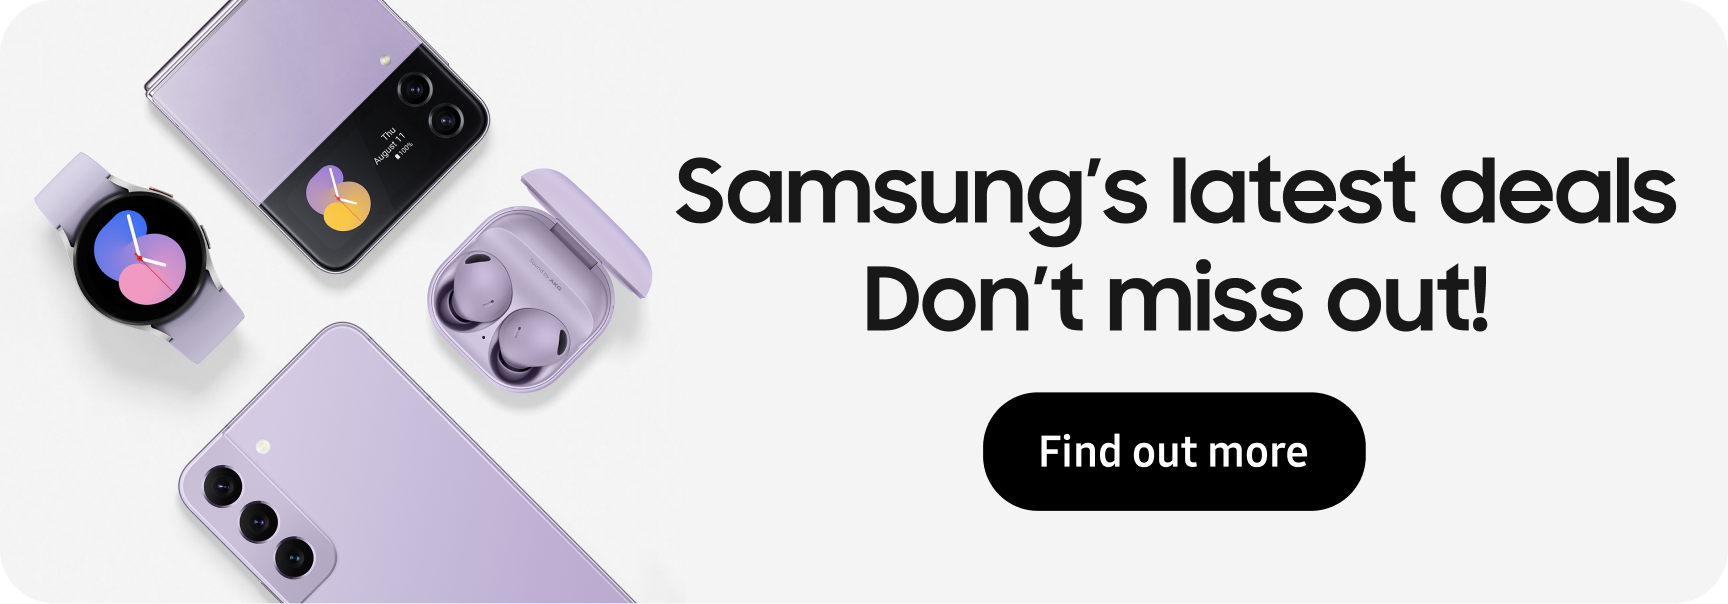 samsung latest deals do not miss out!